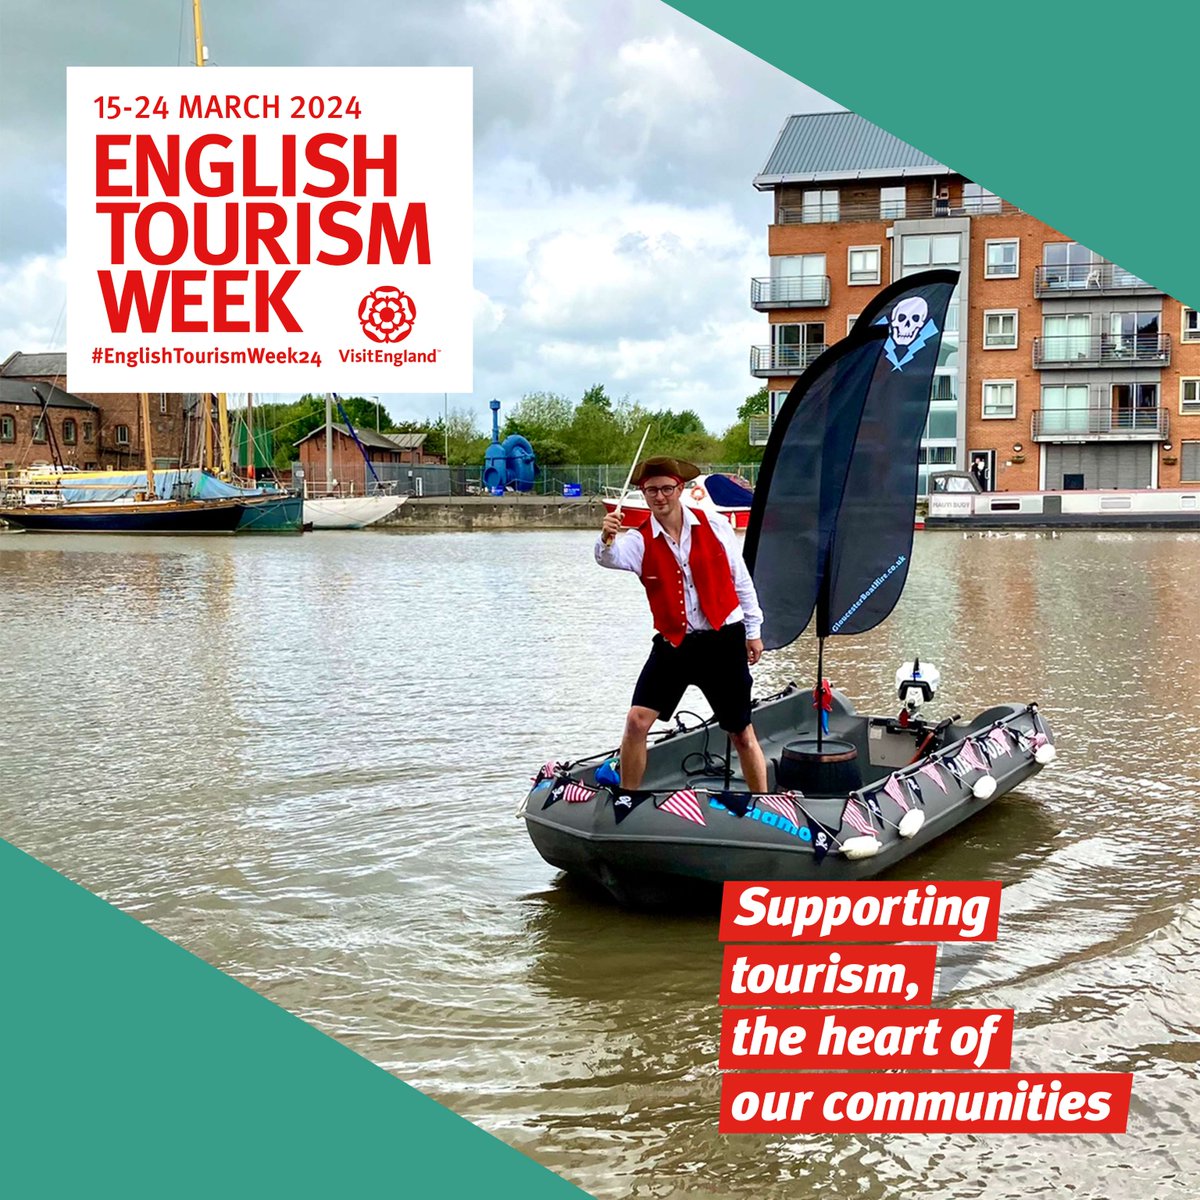 Gloucester Boat Hire can be found in the heart of our glorious docks and offer Self Drive Electric Motorboats for hire. It is the perfect way to explore the city and beyond, from a very different angle. Book your next voyage today! gloucesterboathire.co.uk #EnglishTourismWeek24